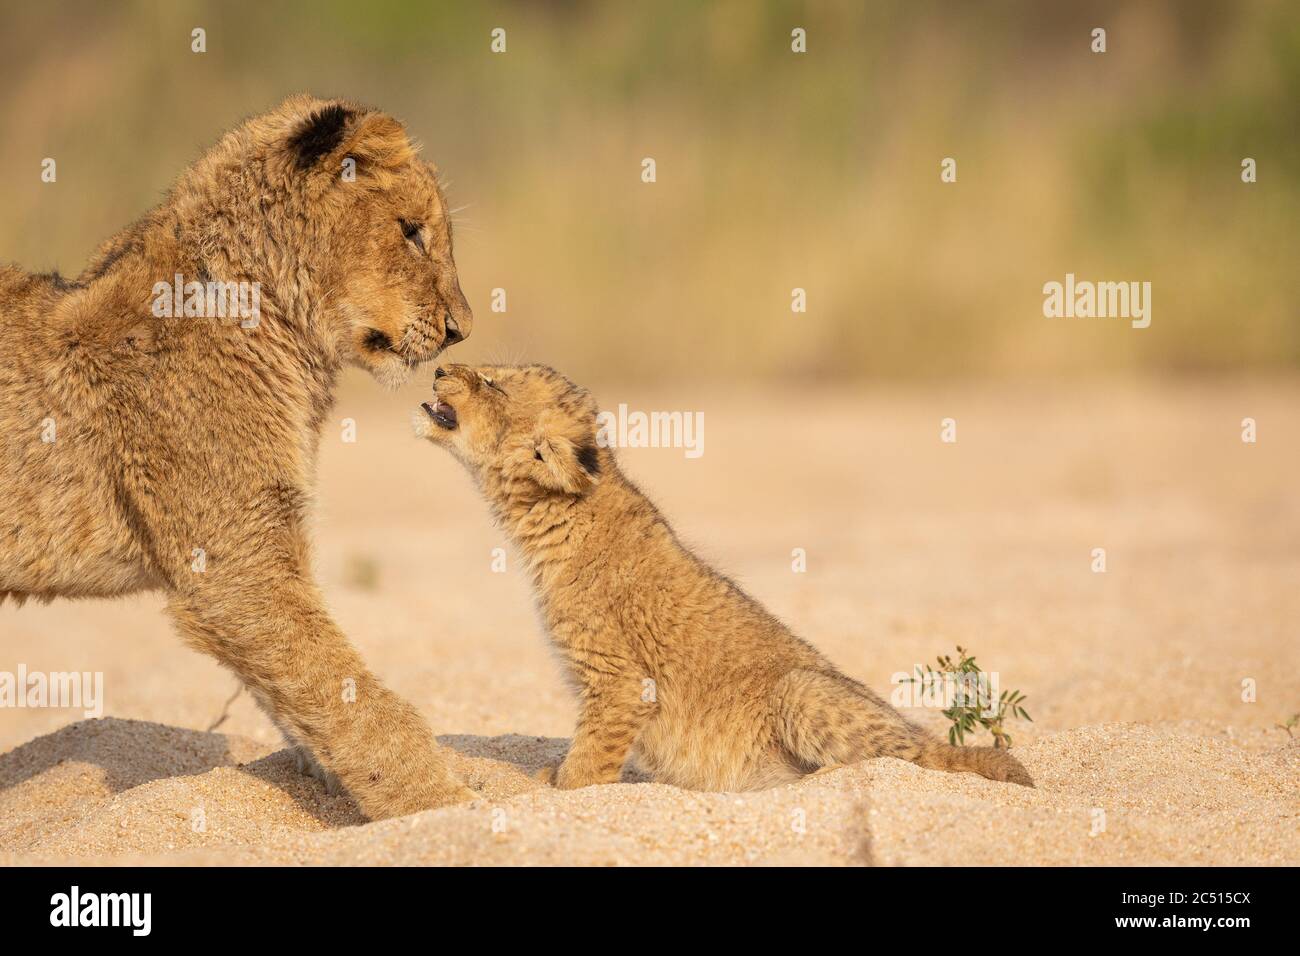 Baby lion greeting a bigger brother in warm afternoon light sitting in sandy riverbed in Kruger National Park South Africa Stock Photo